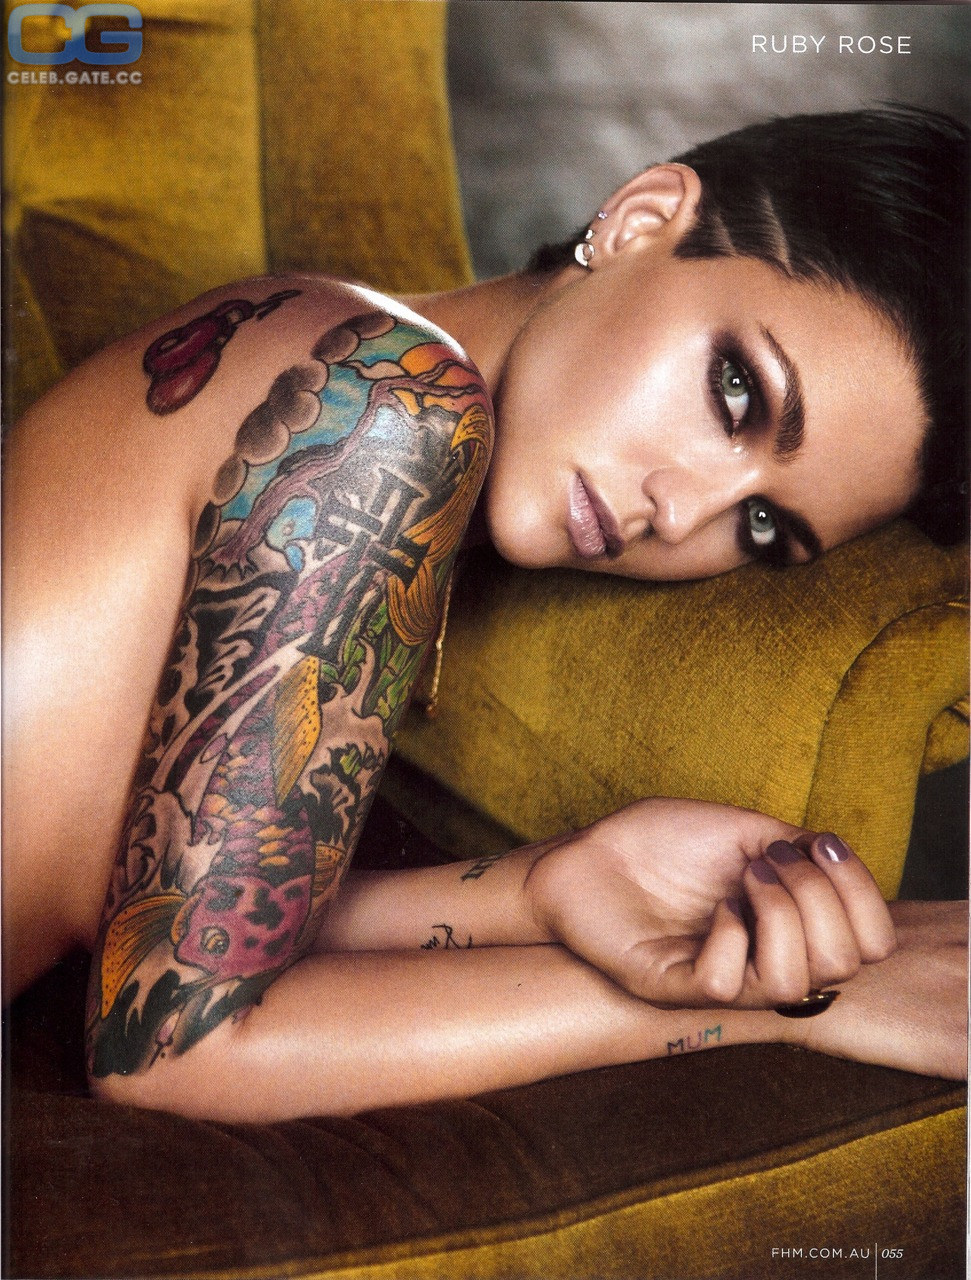 Nude Ruby Rose